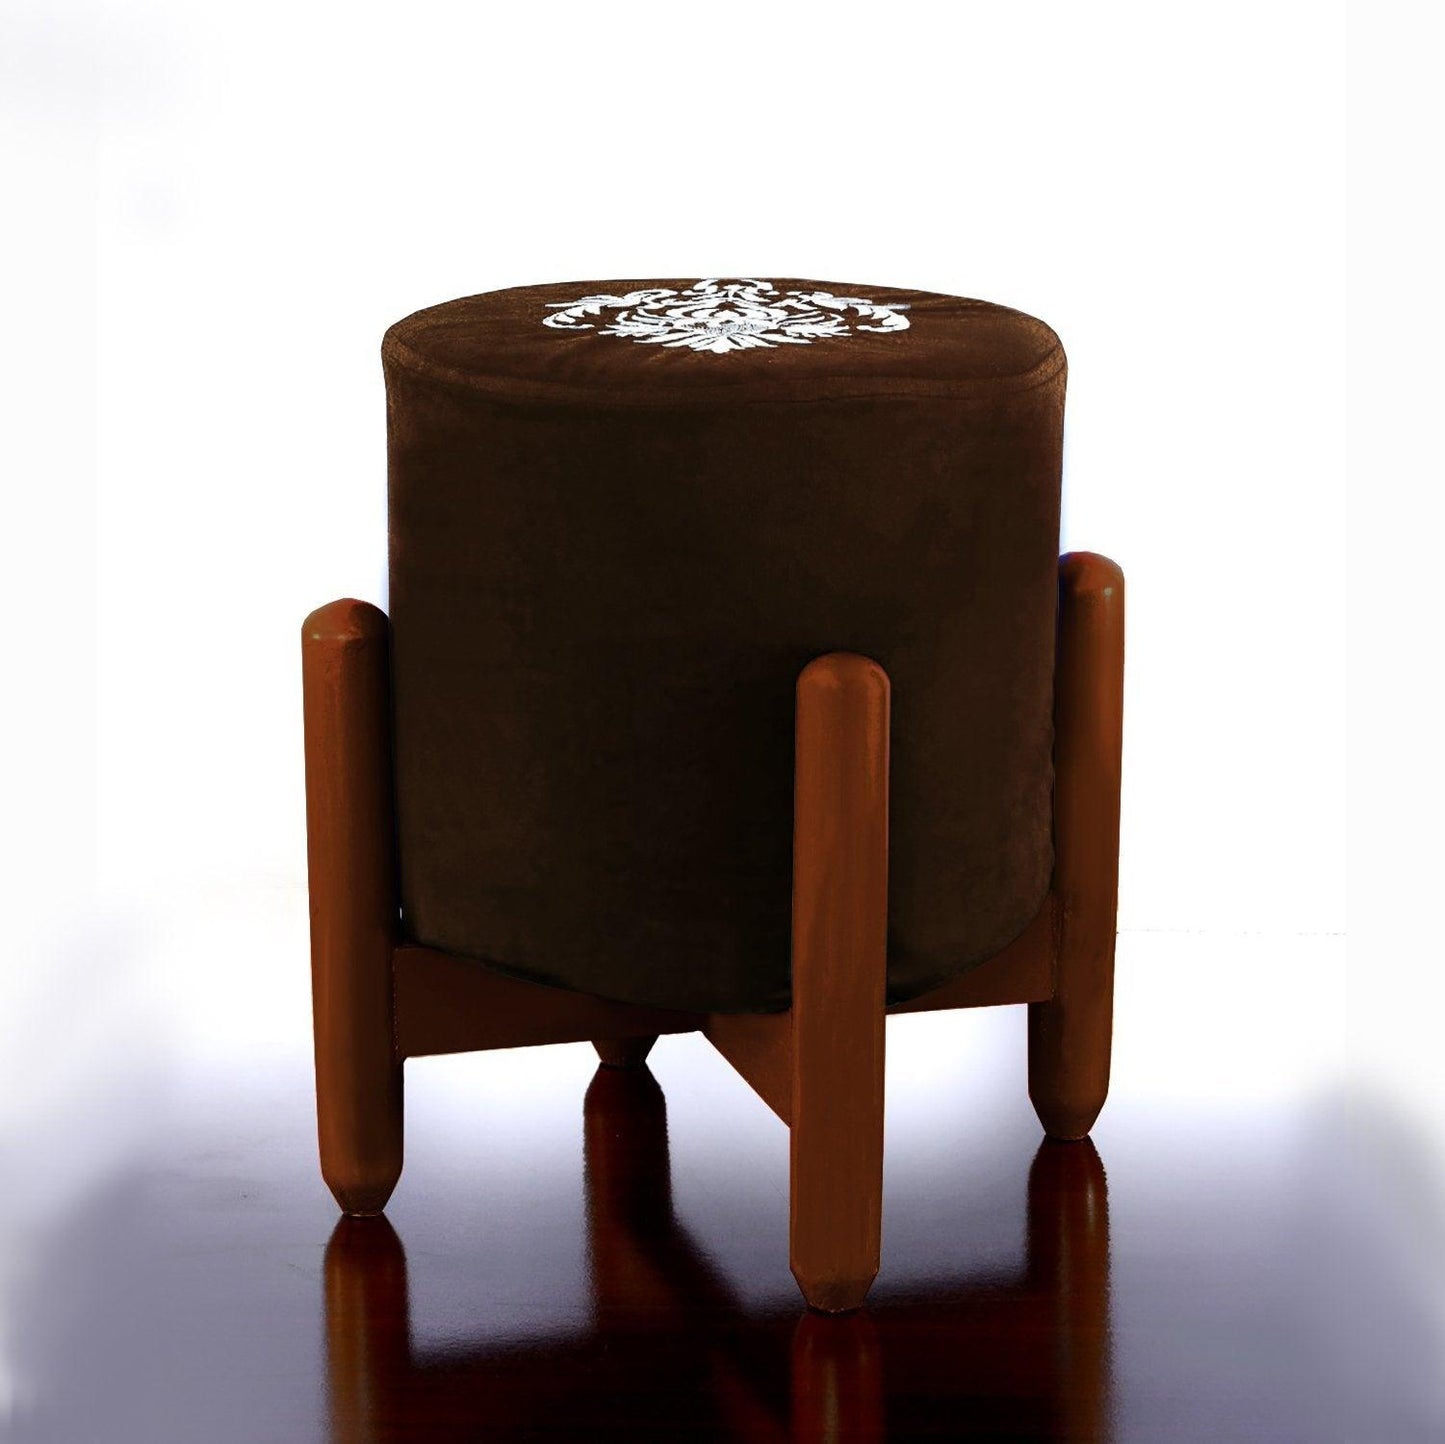 Drone Shape Round stool With Embroidery -380 - 92Bedding